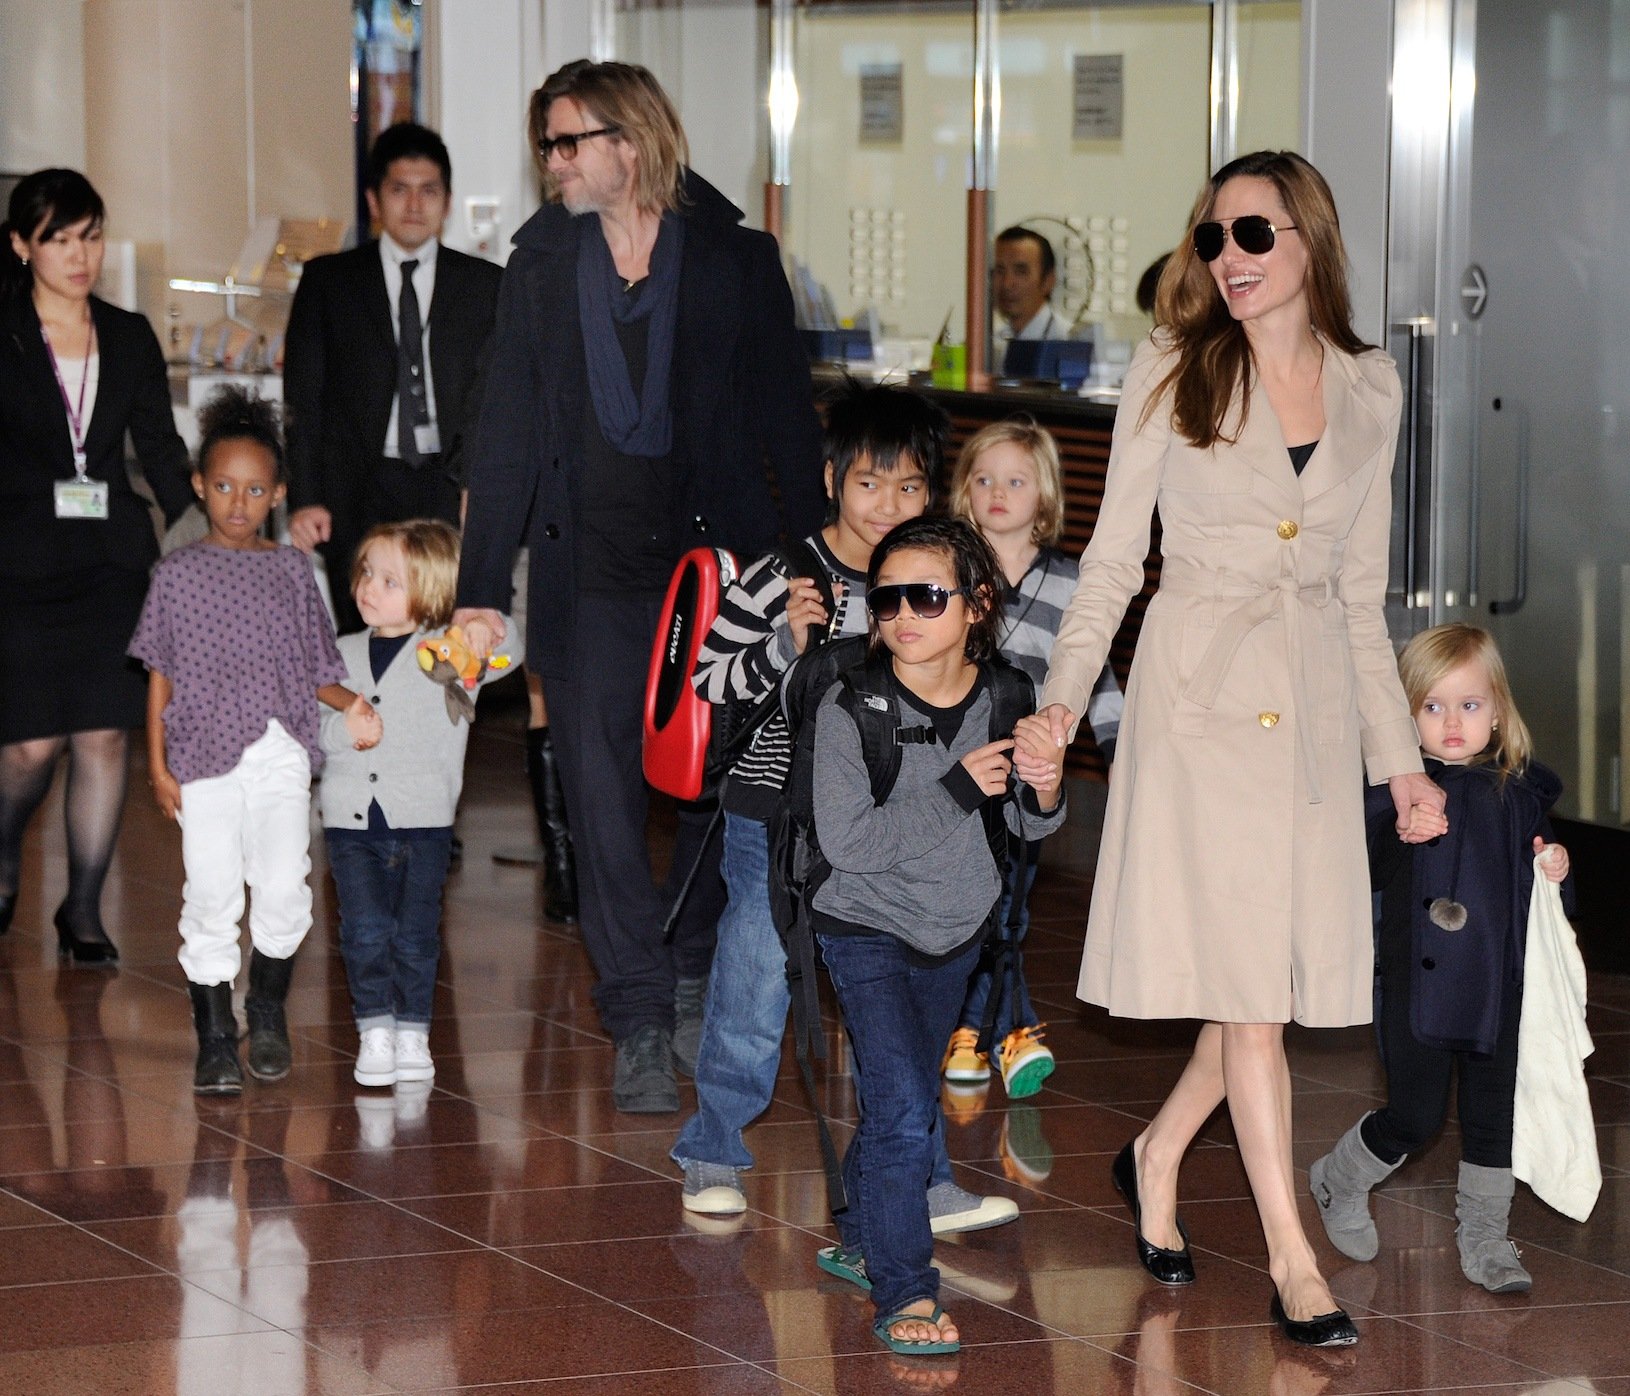 Angelina Jolie and Brad Pitt at the airport with their kids